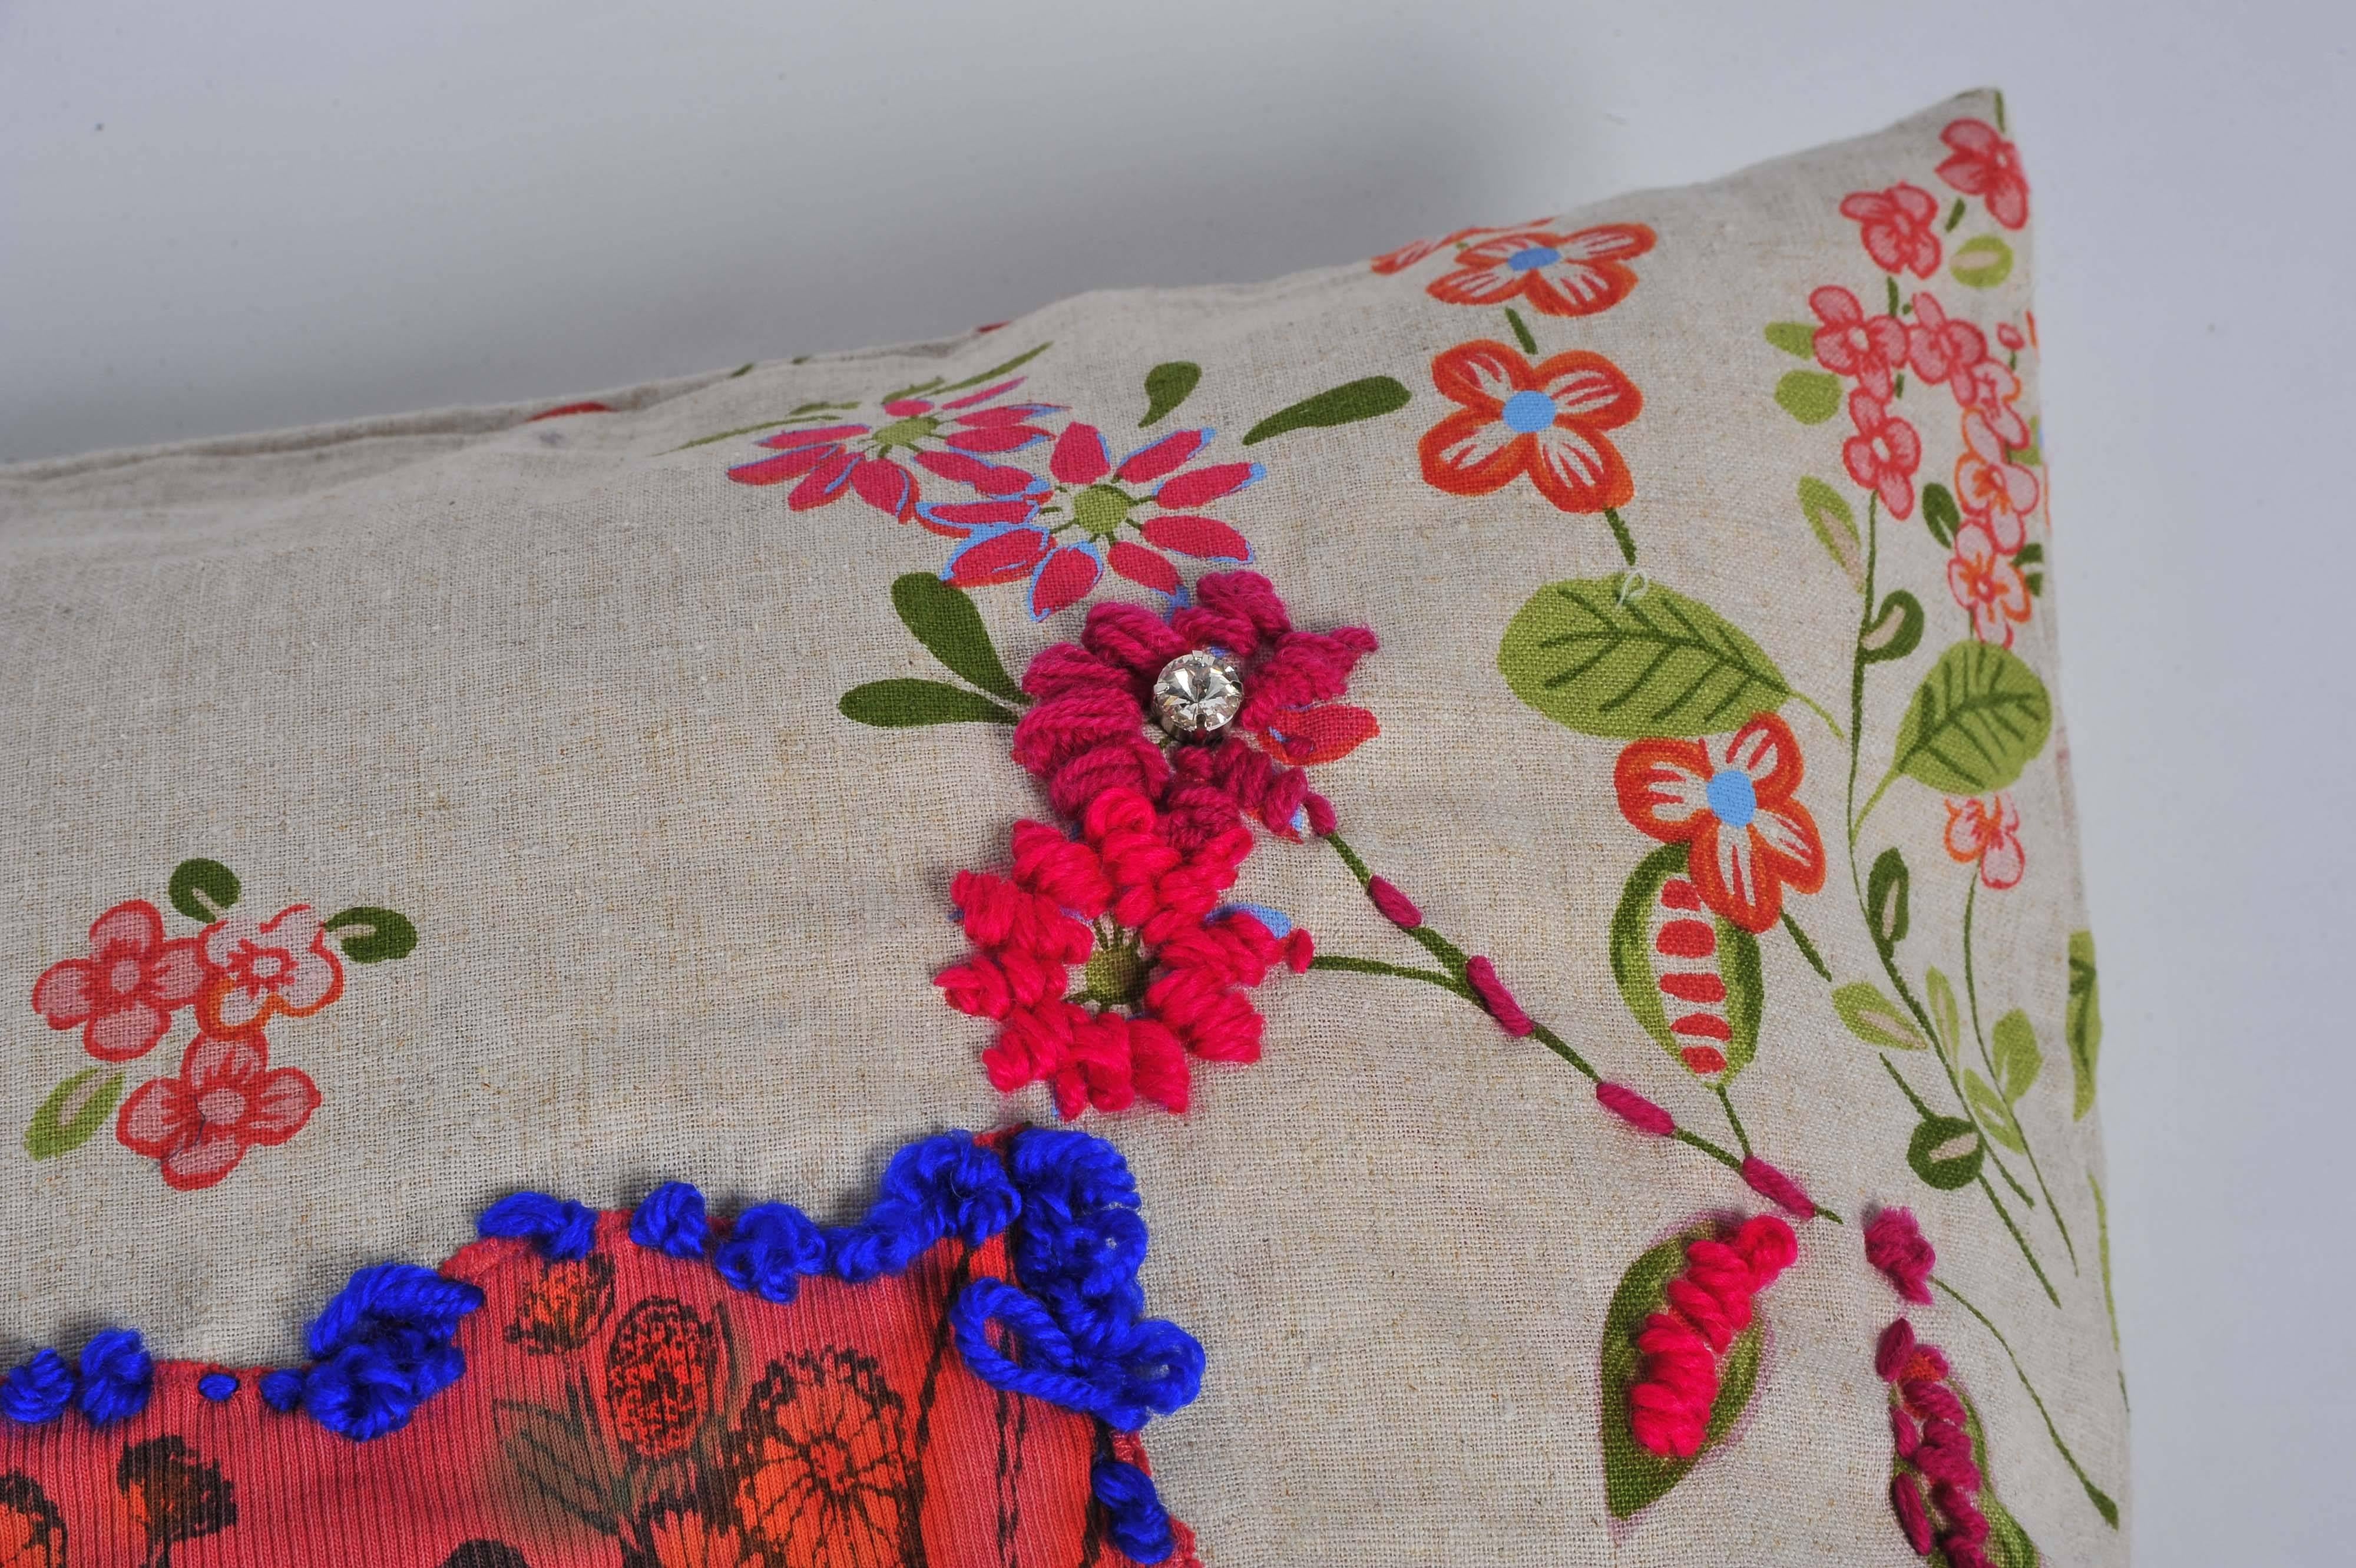 British Unique Handmade Bohemian Colourful Floral Patterned Small Cushion For Sale